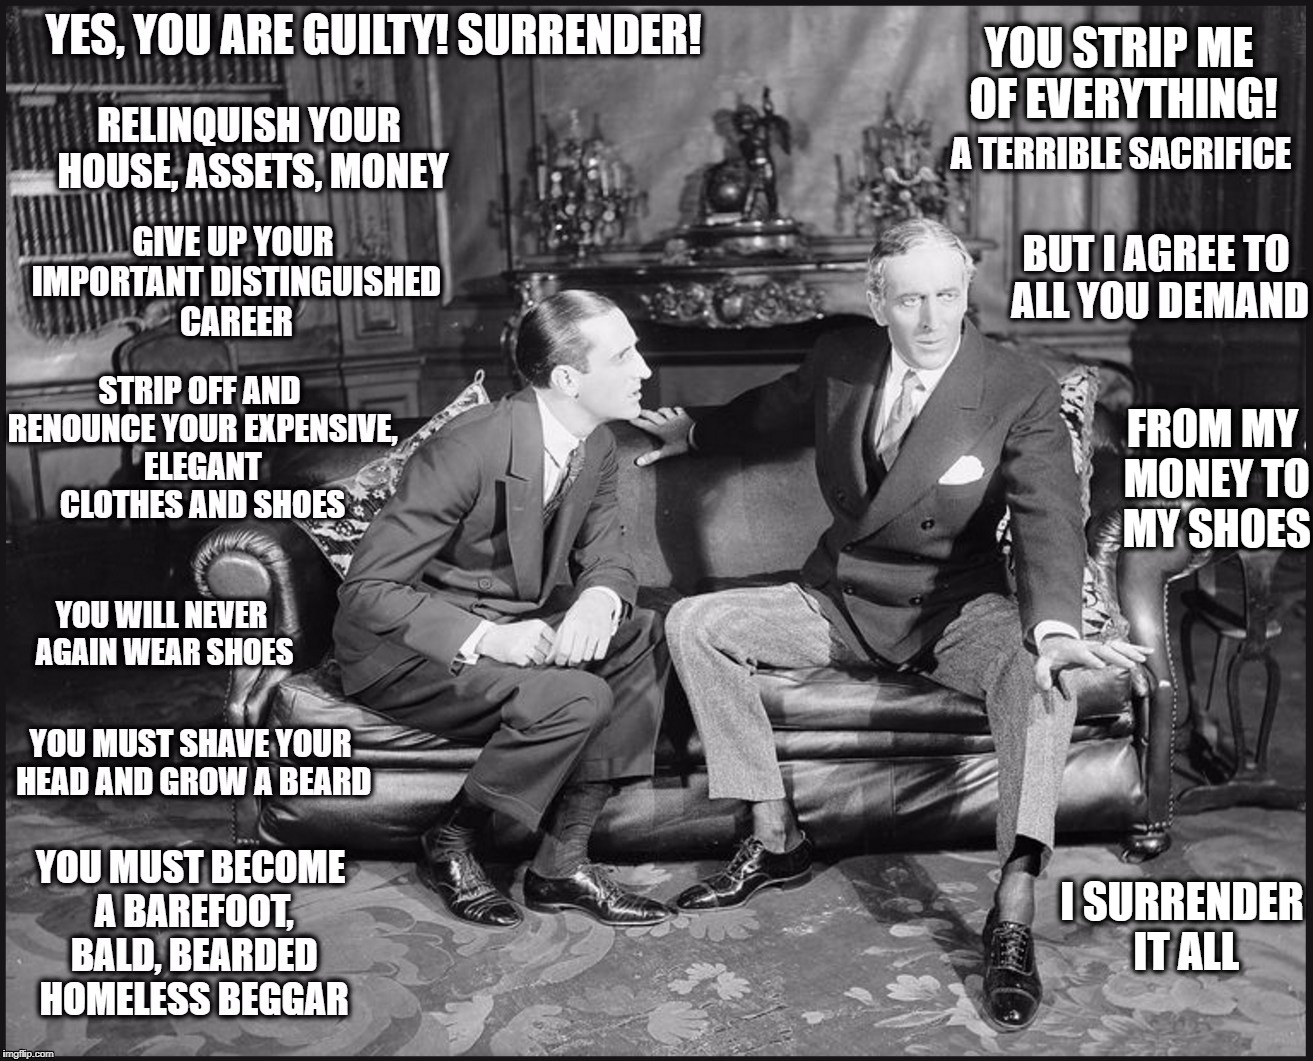 Progressive Guilt and Brainwashing | YOU STRIP ME OF EVERYTHING! FROM MY MONEY TO MY SHOES; I SURRENDER IT ALL | image tagged in guult,privilege,leftists | made w/ Imgflip meme maker